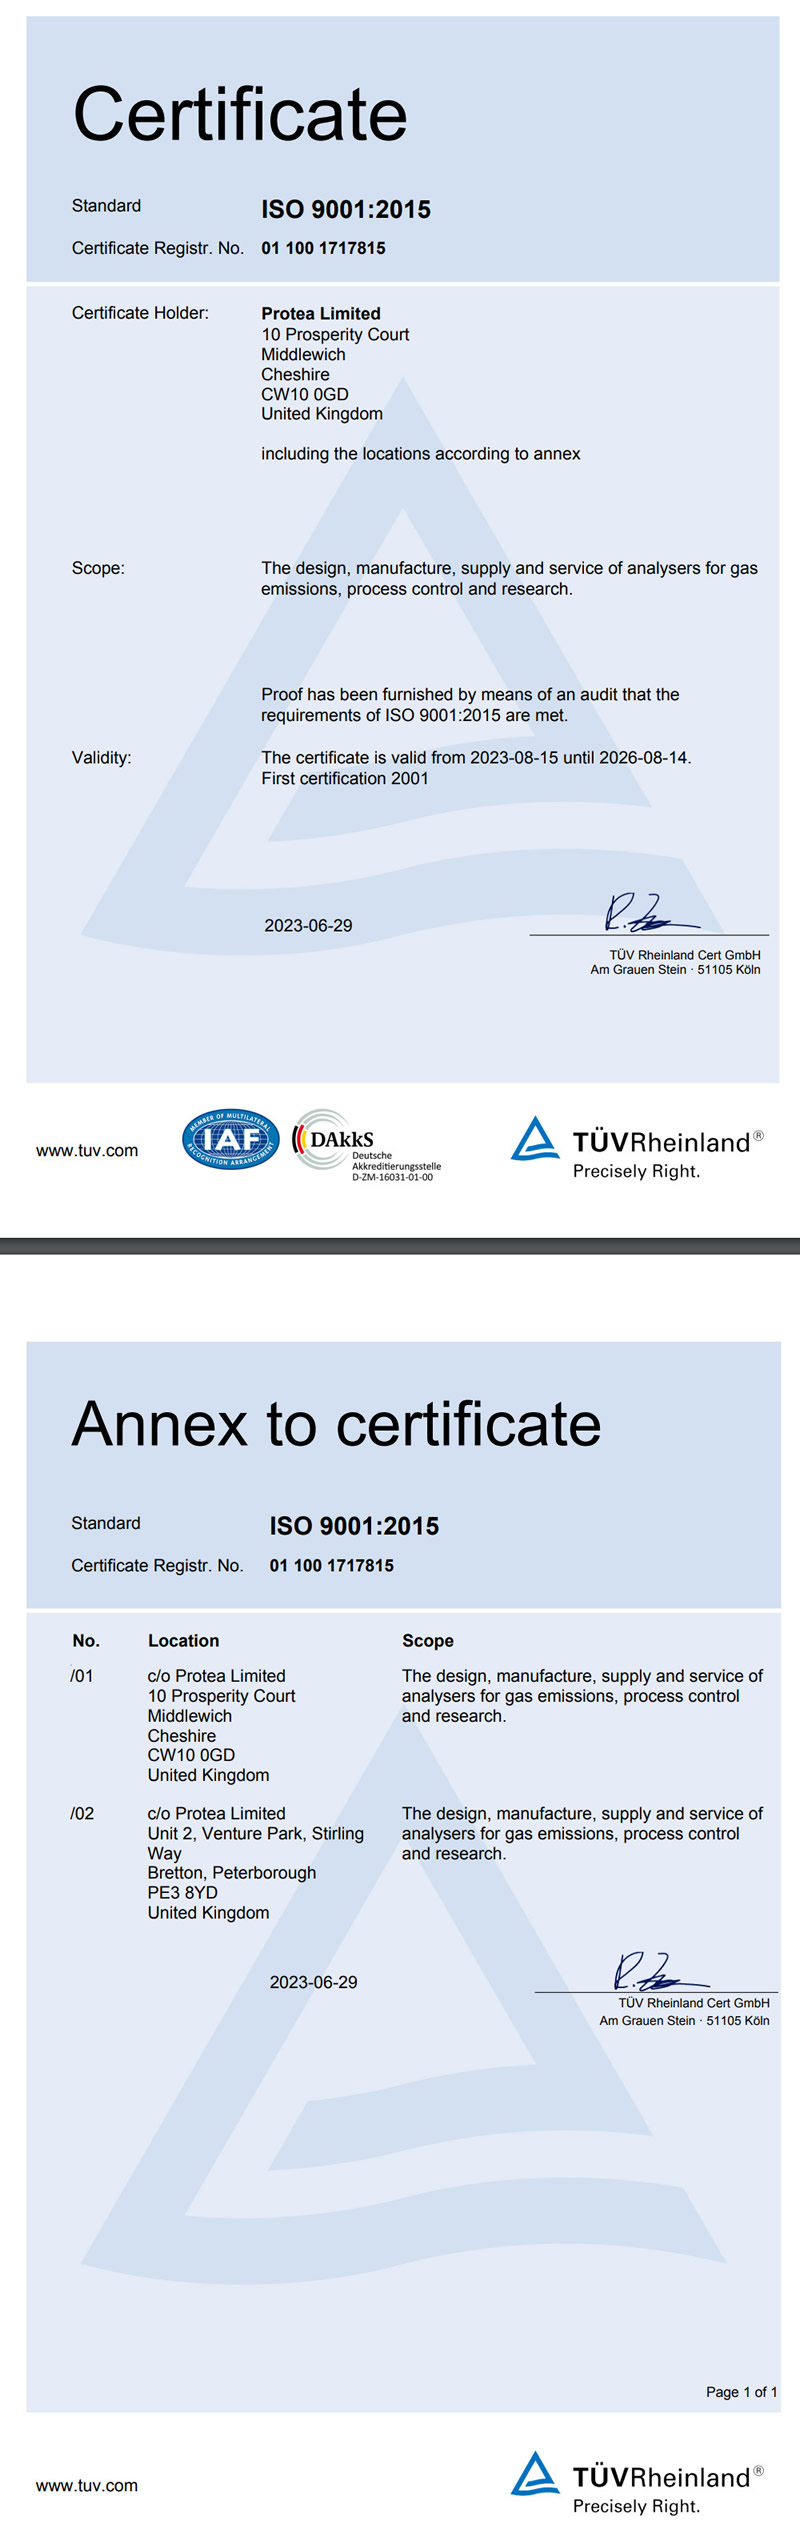 ISO 9001:2015 Re-certification Complete